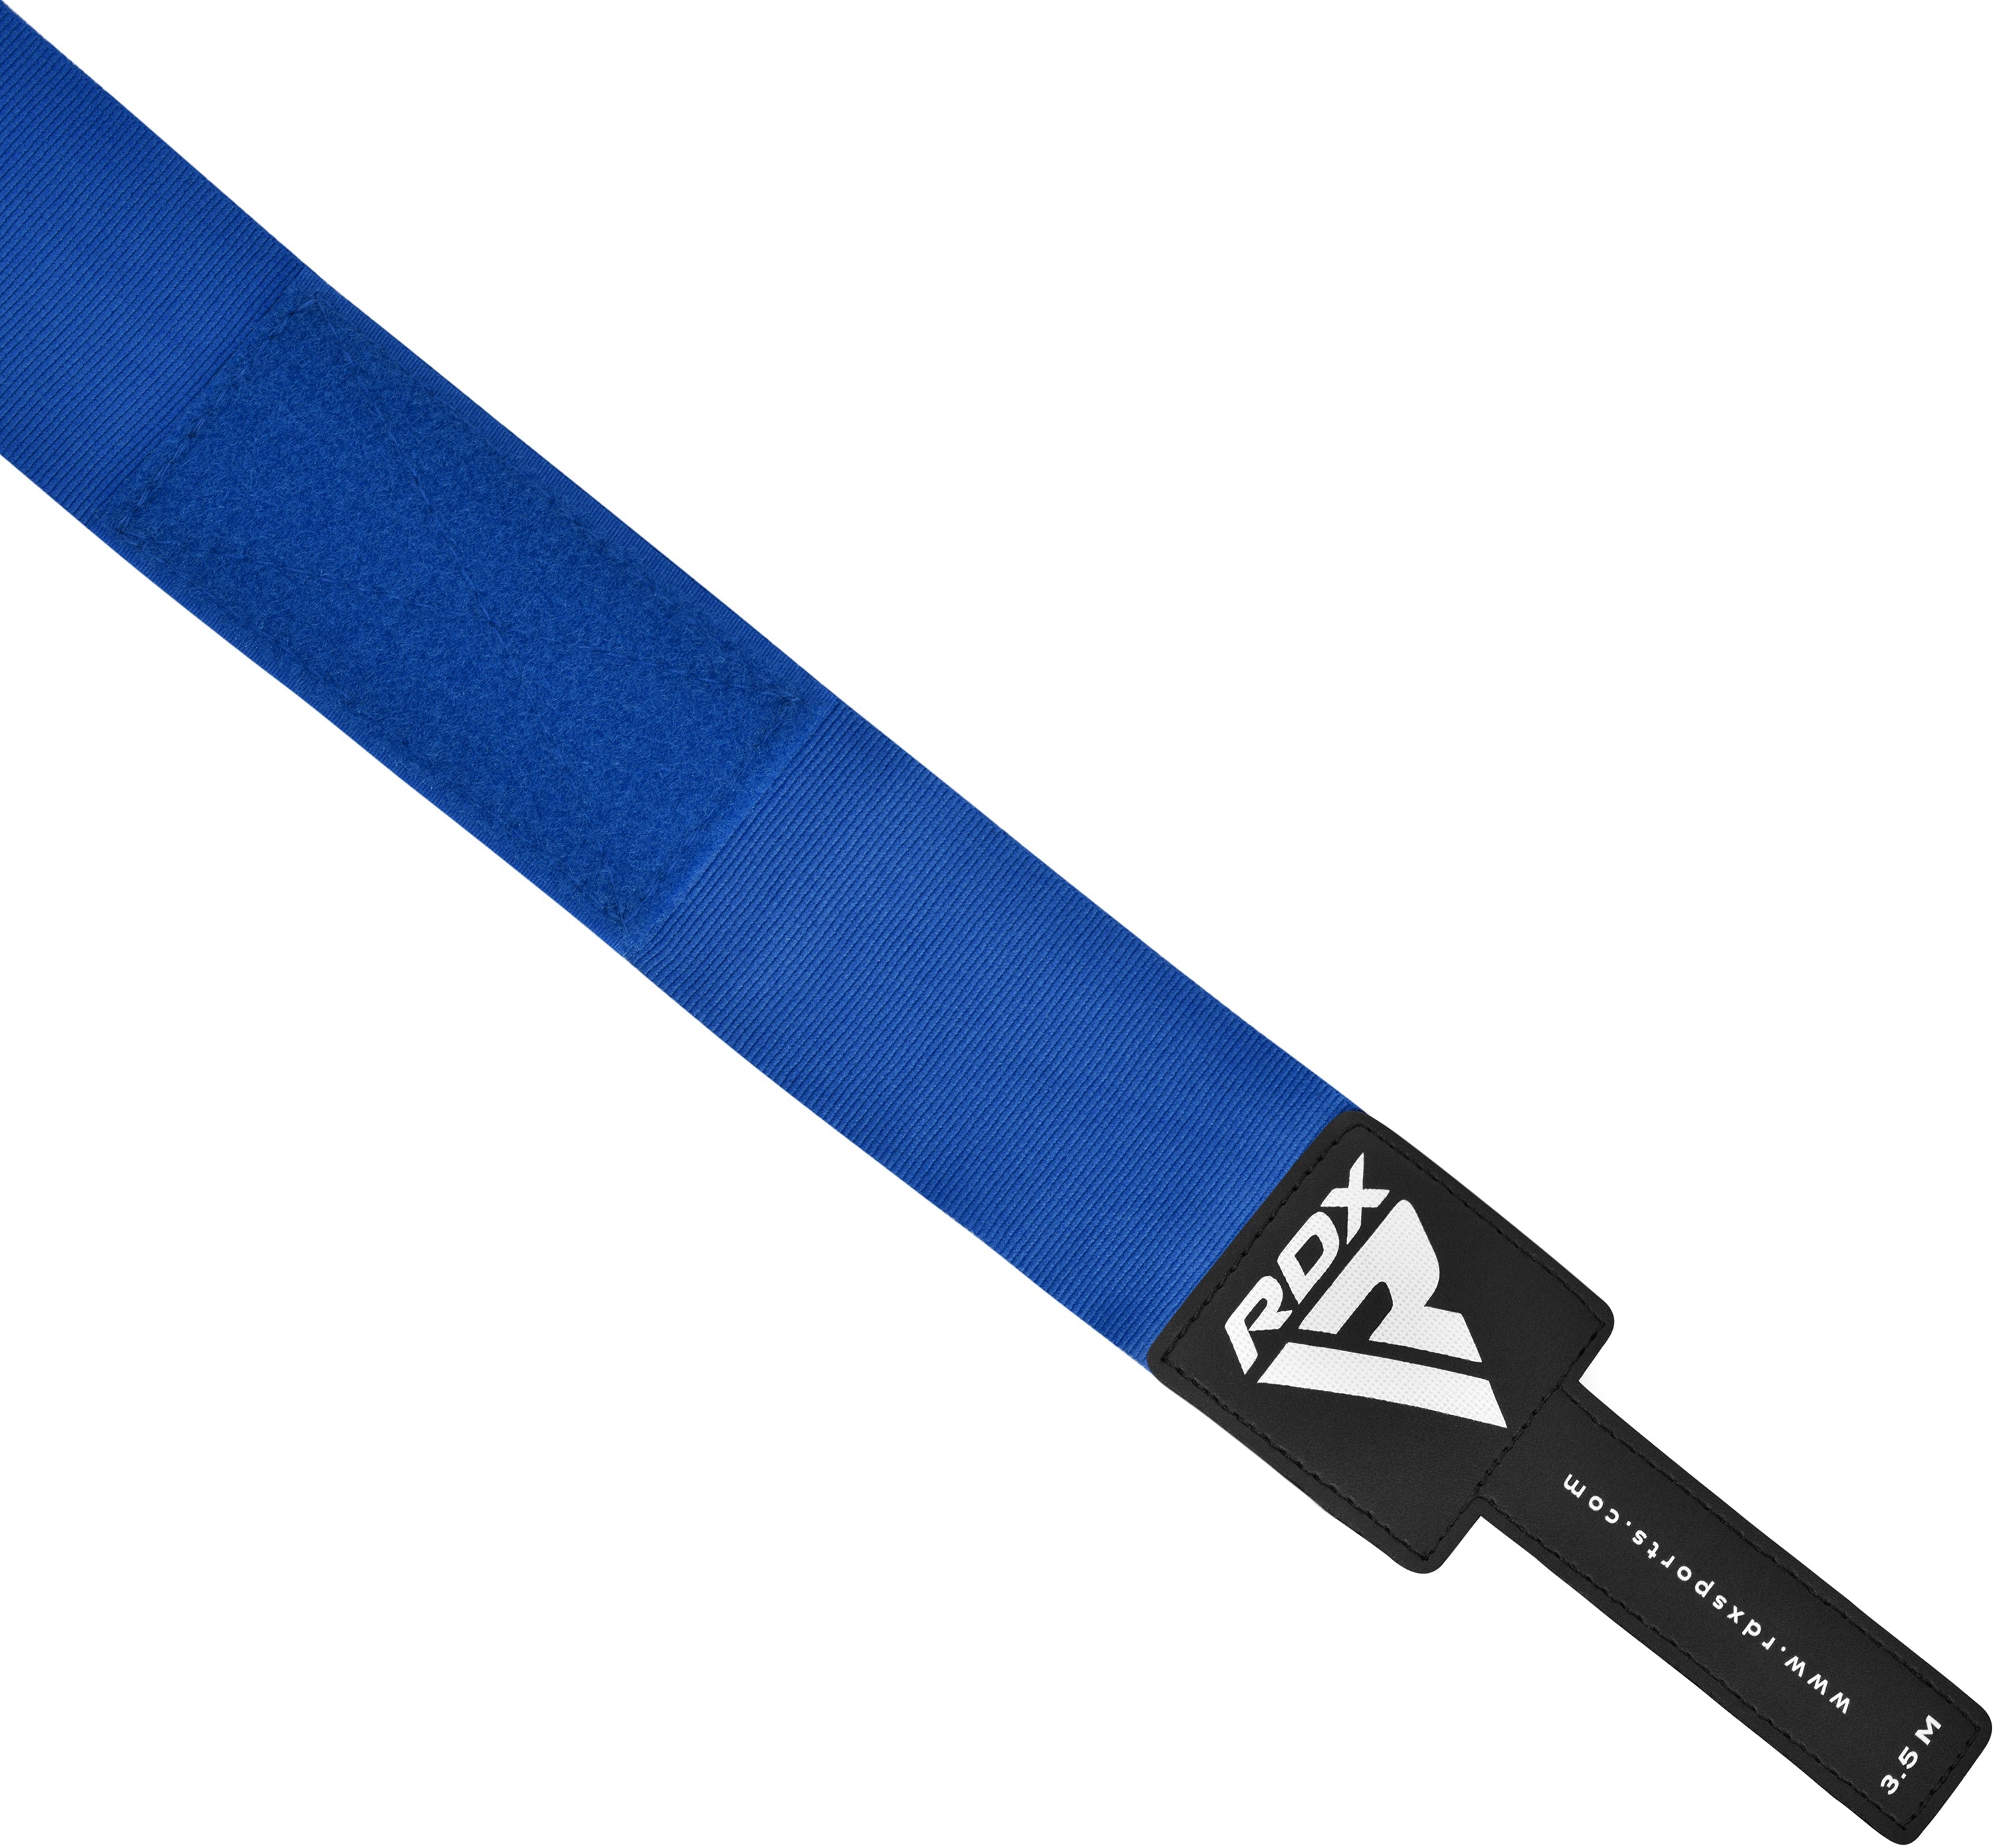 RDX IBA Boxing Hand Wraps#color_blue